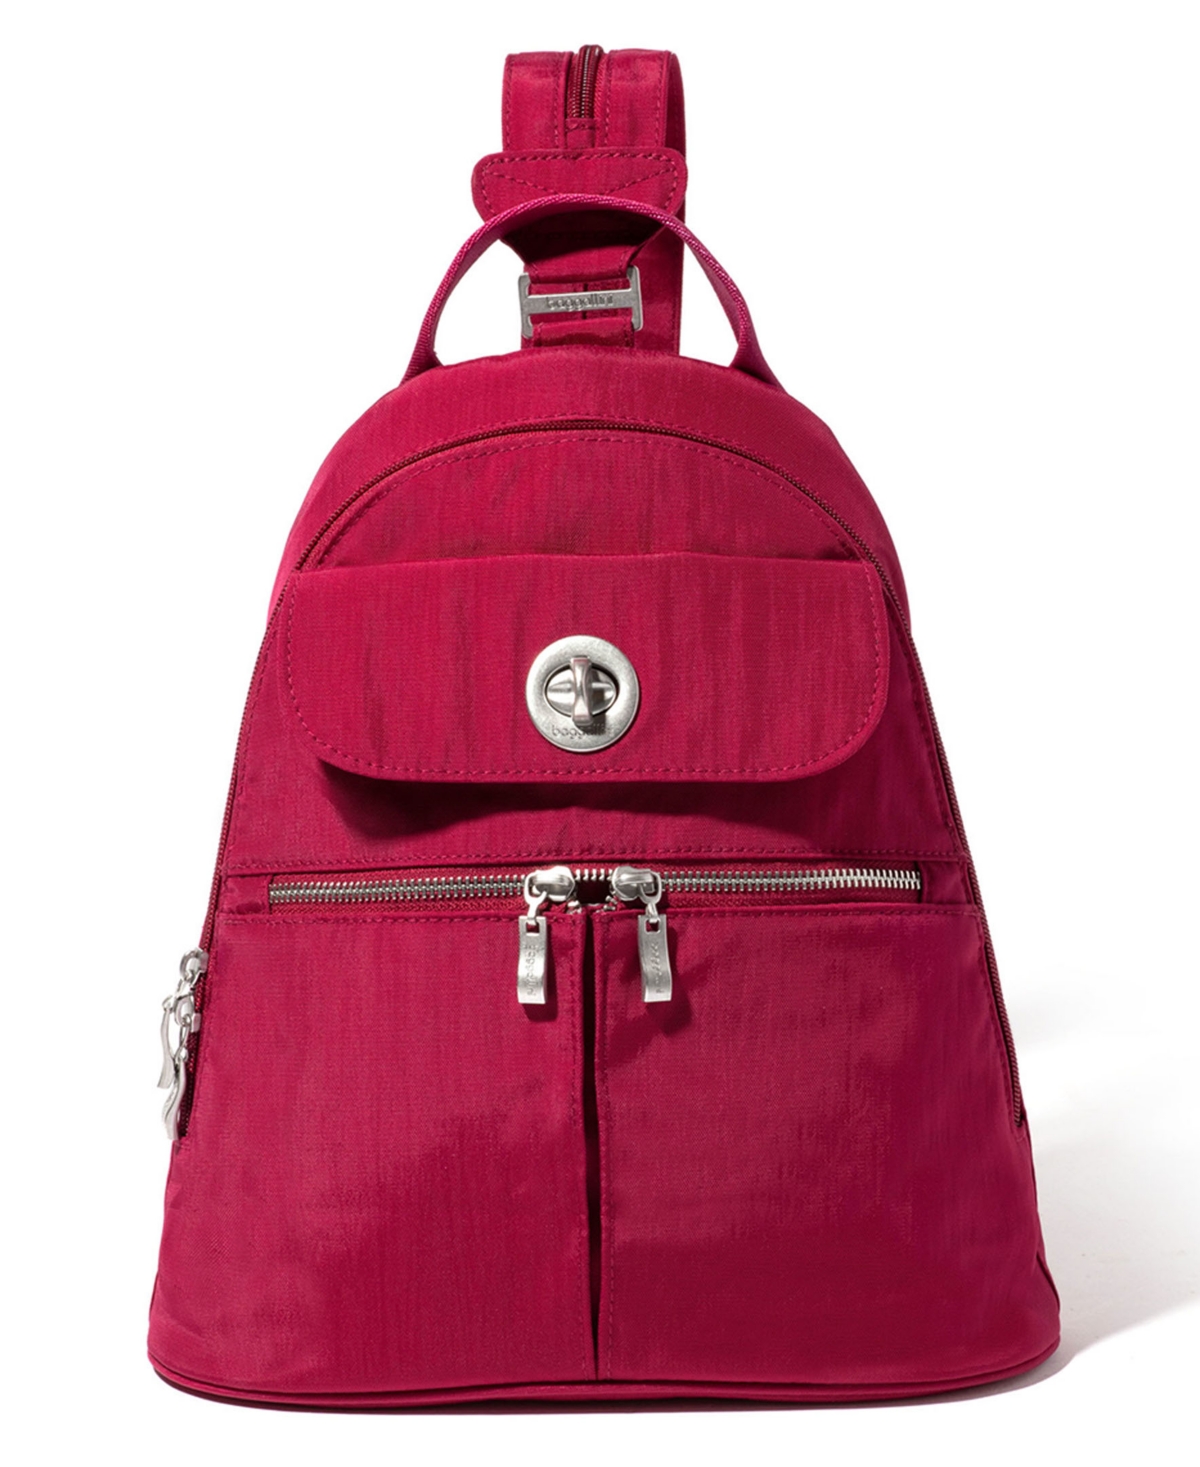 Baggallini Naples Convertible Backpack In Beet Red